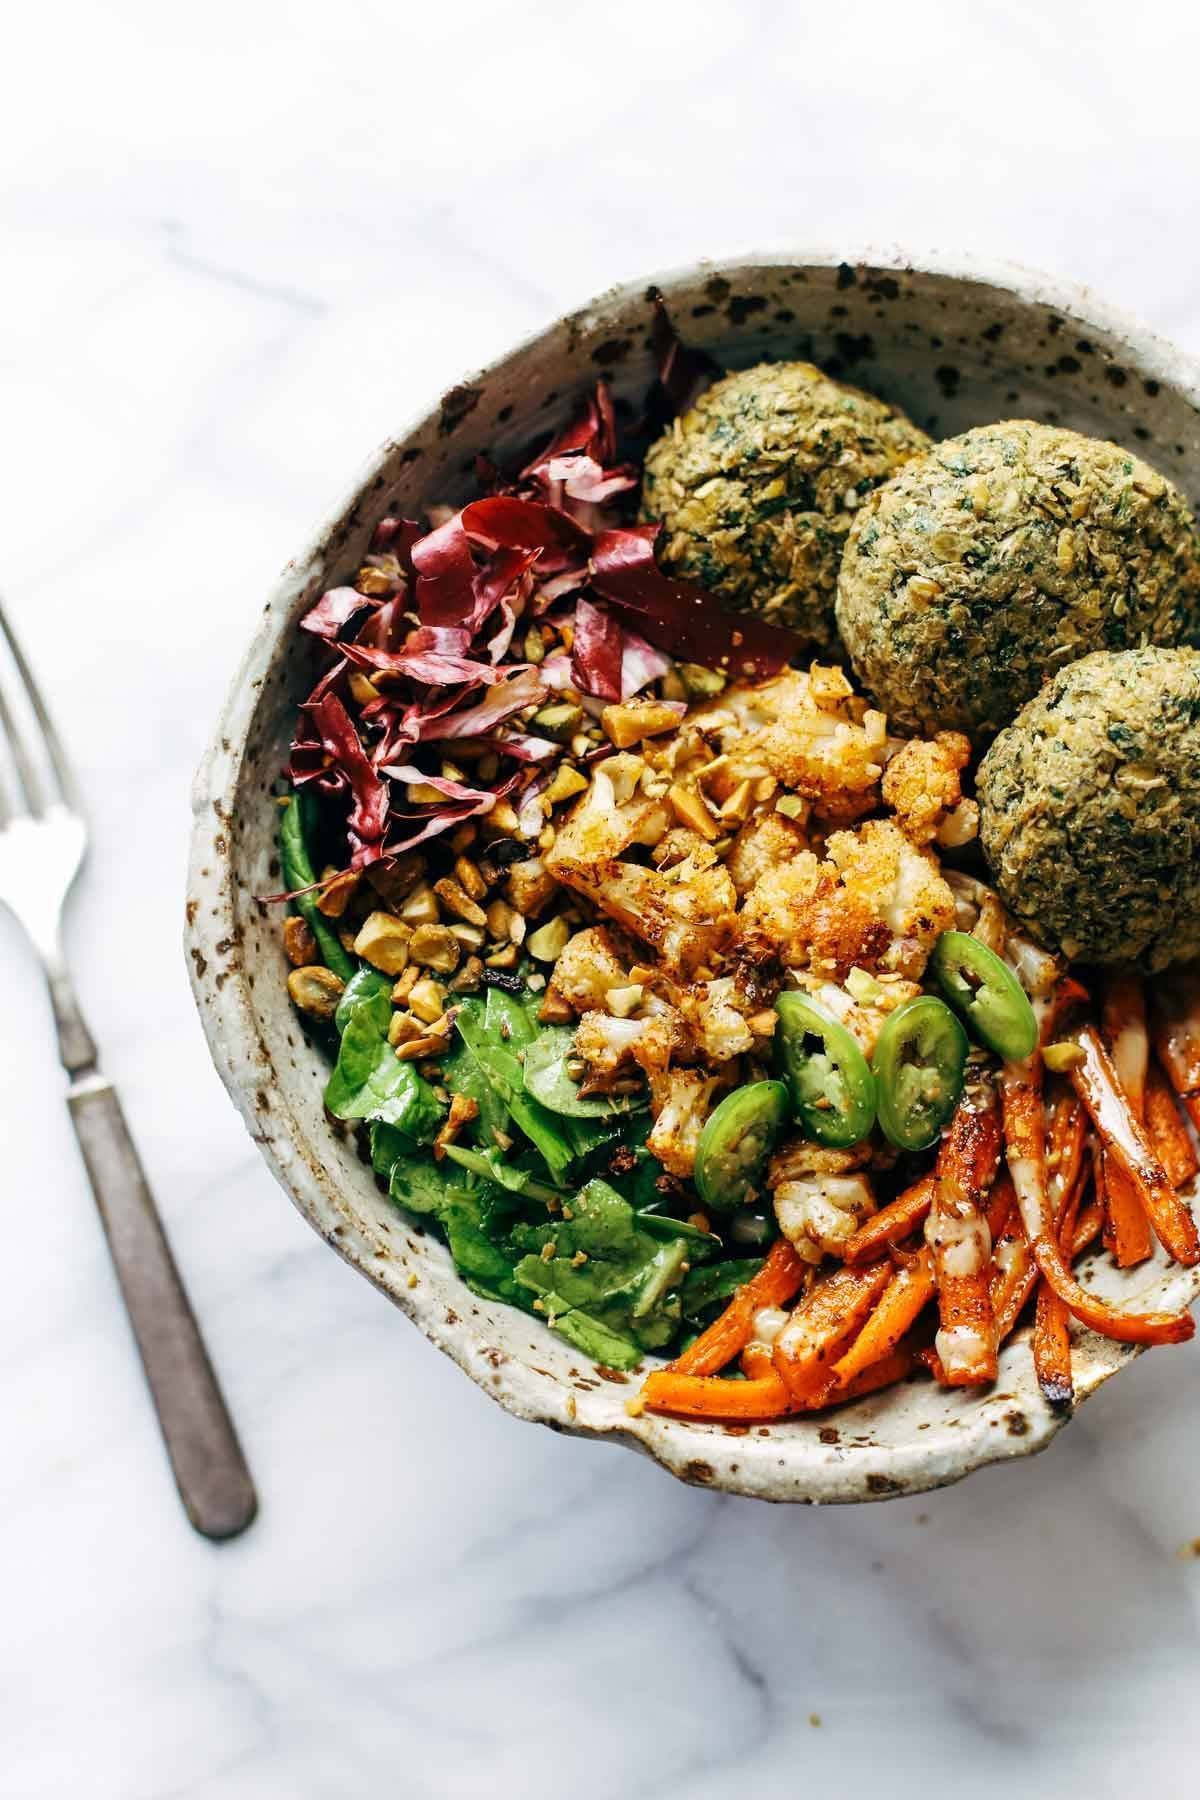 Keep your glow all winter! Easy homemade falafel, roasted veggies, and flavorful sauce all in one big bliss bowl! vegetarian / vegan / gluten free recipe. | pinchofyum.com